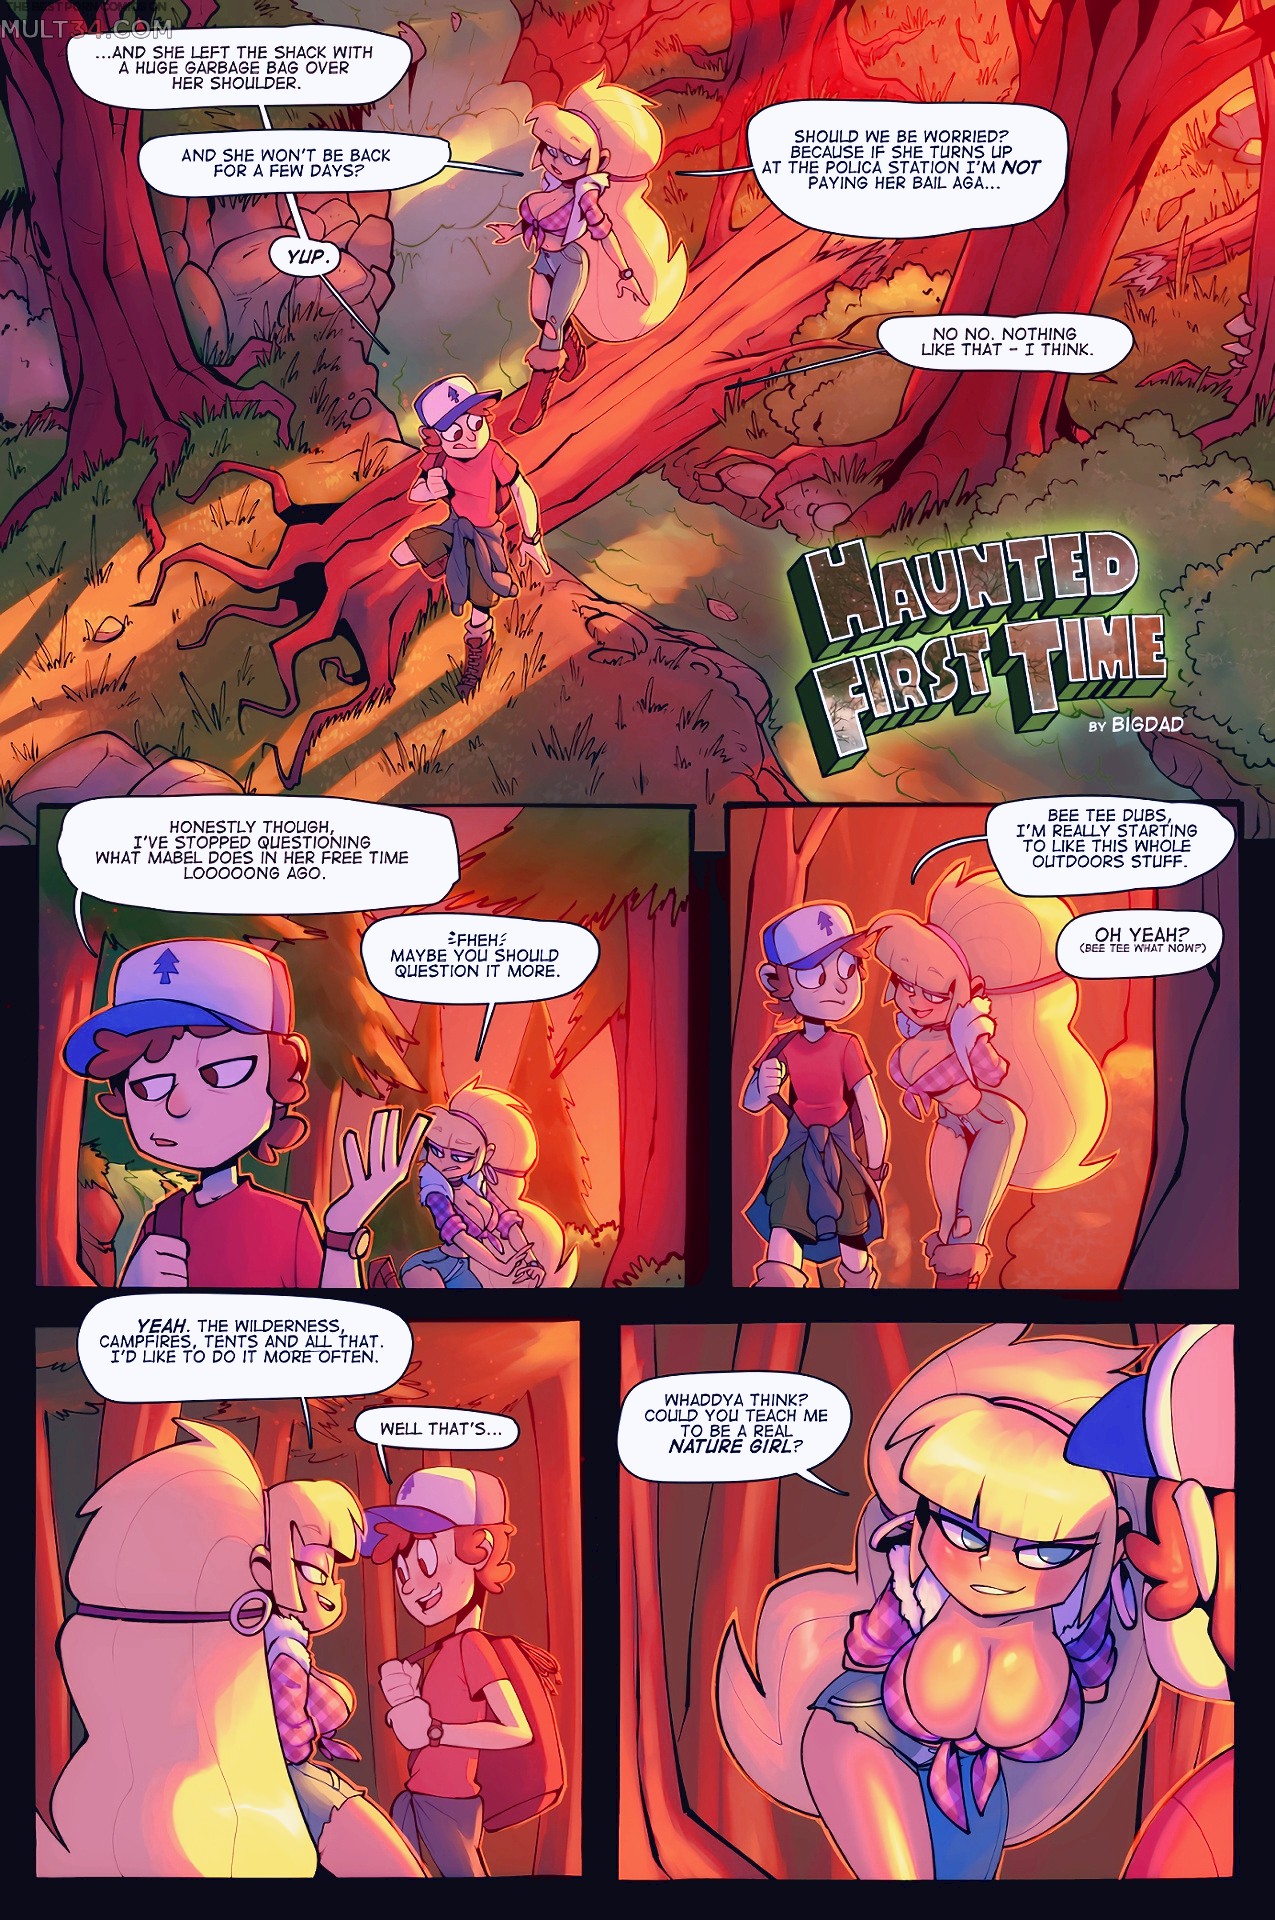 Gravity Falls Pacifica Sex - Haunted First Time porn comic - the best cartoon porn comics, Rule 34 |  MULT34